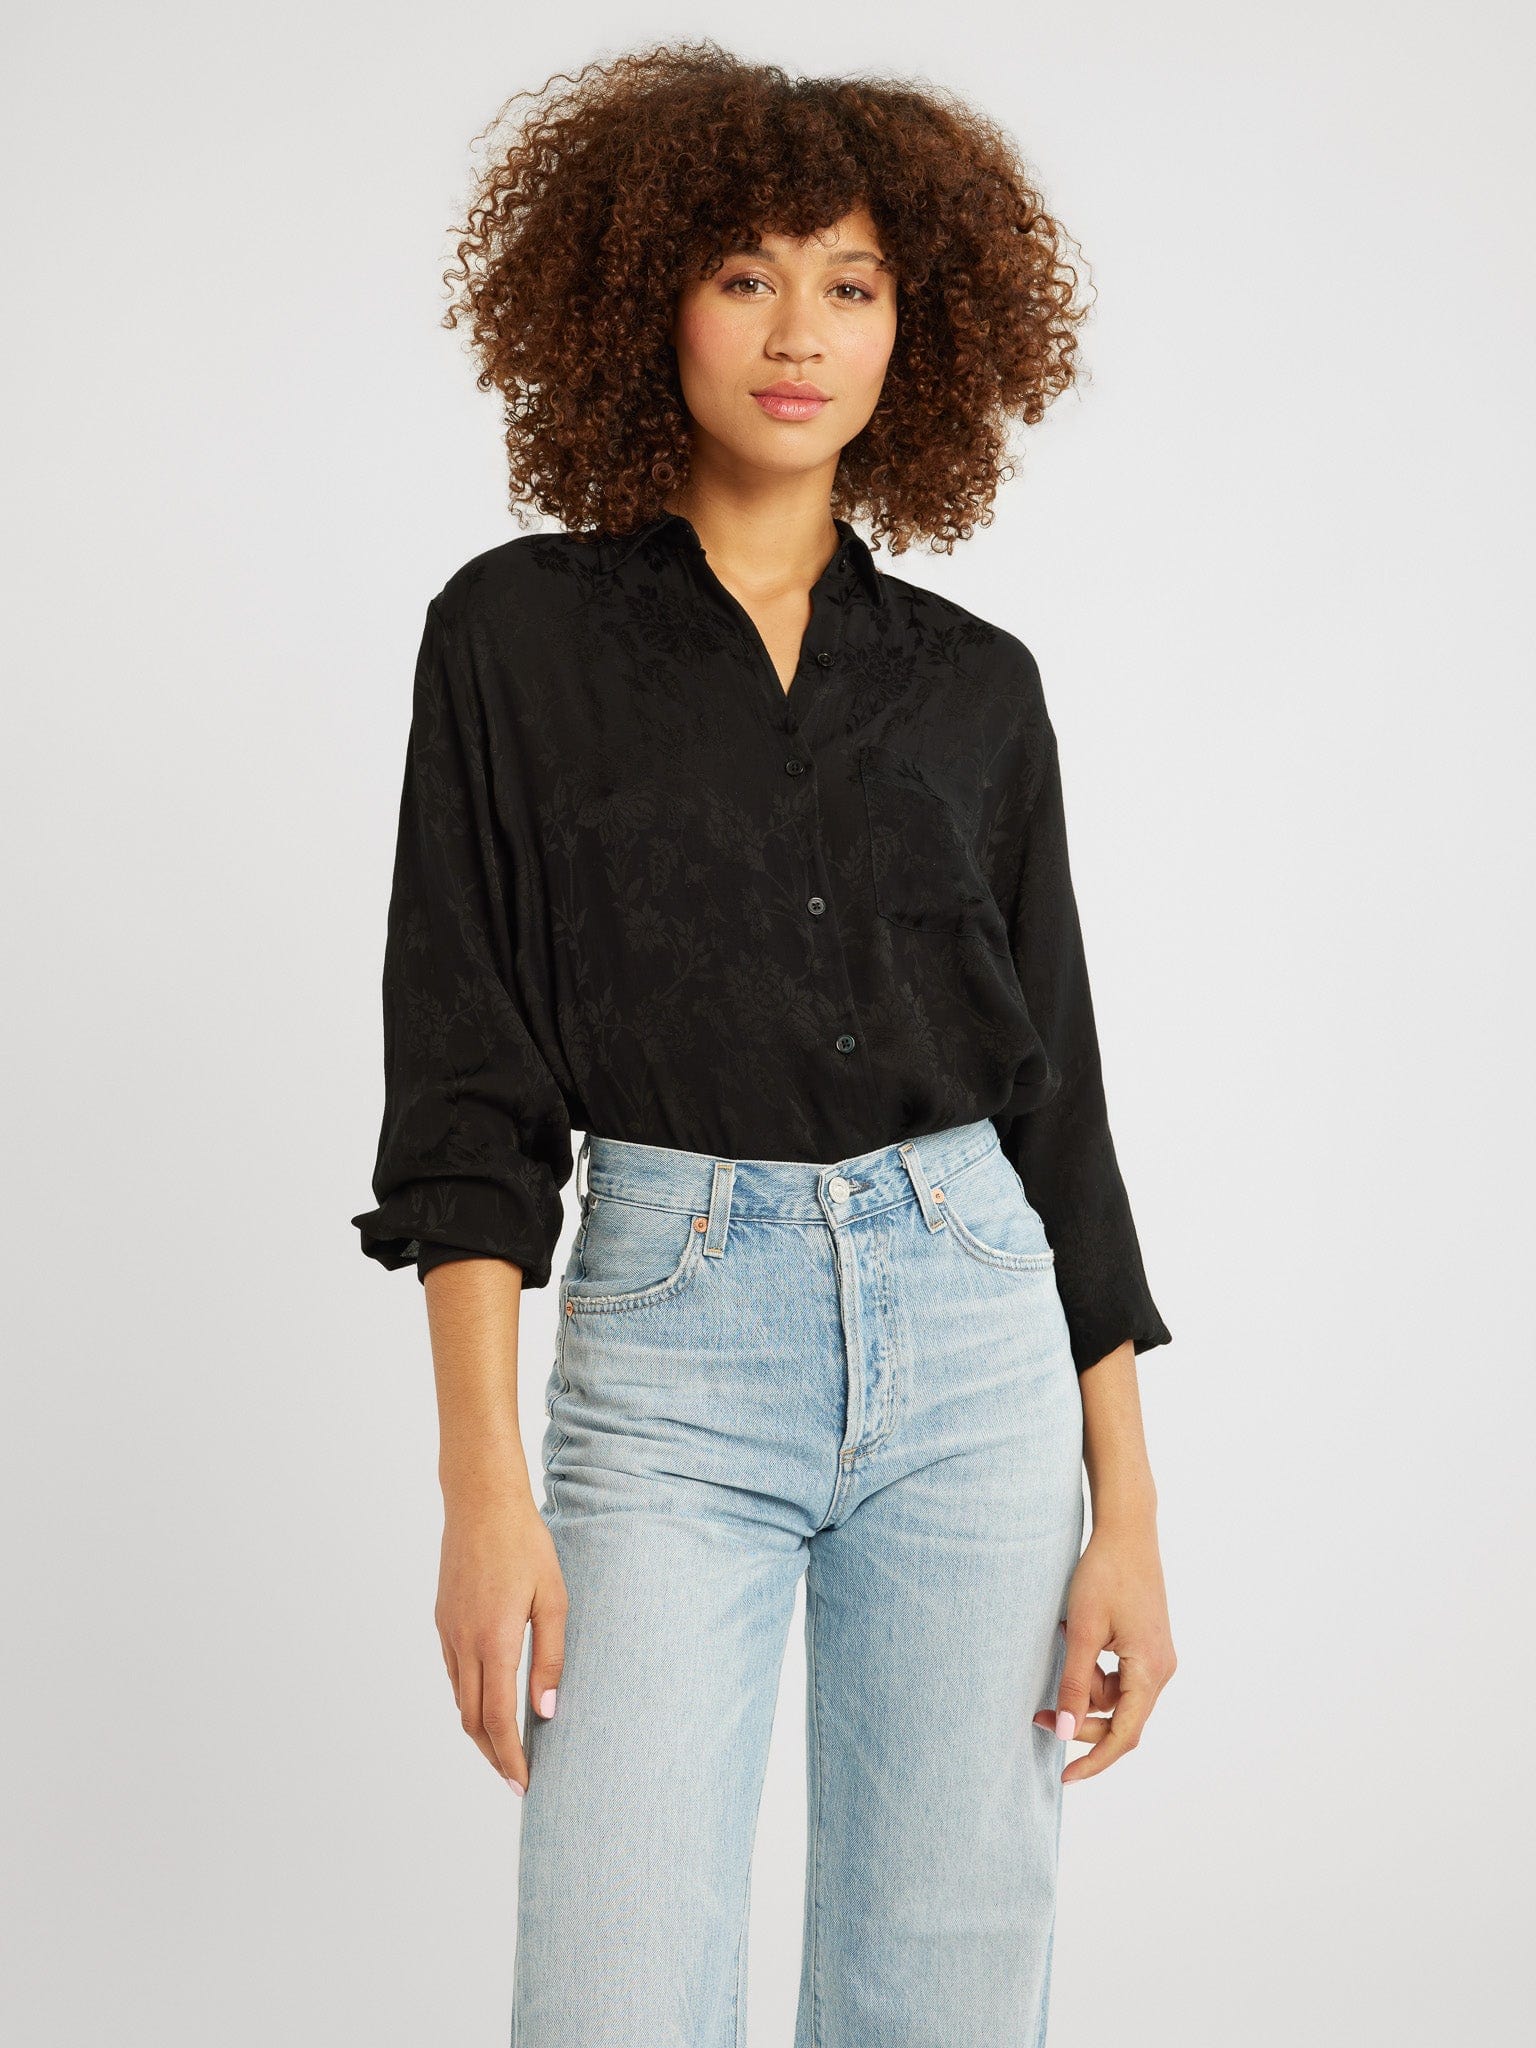 MILLE Clothing Sofia Top in Black Jacquard